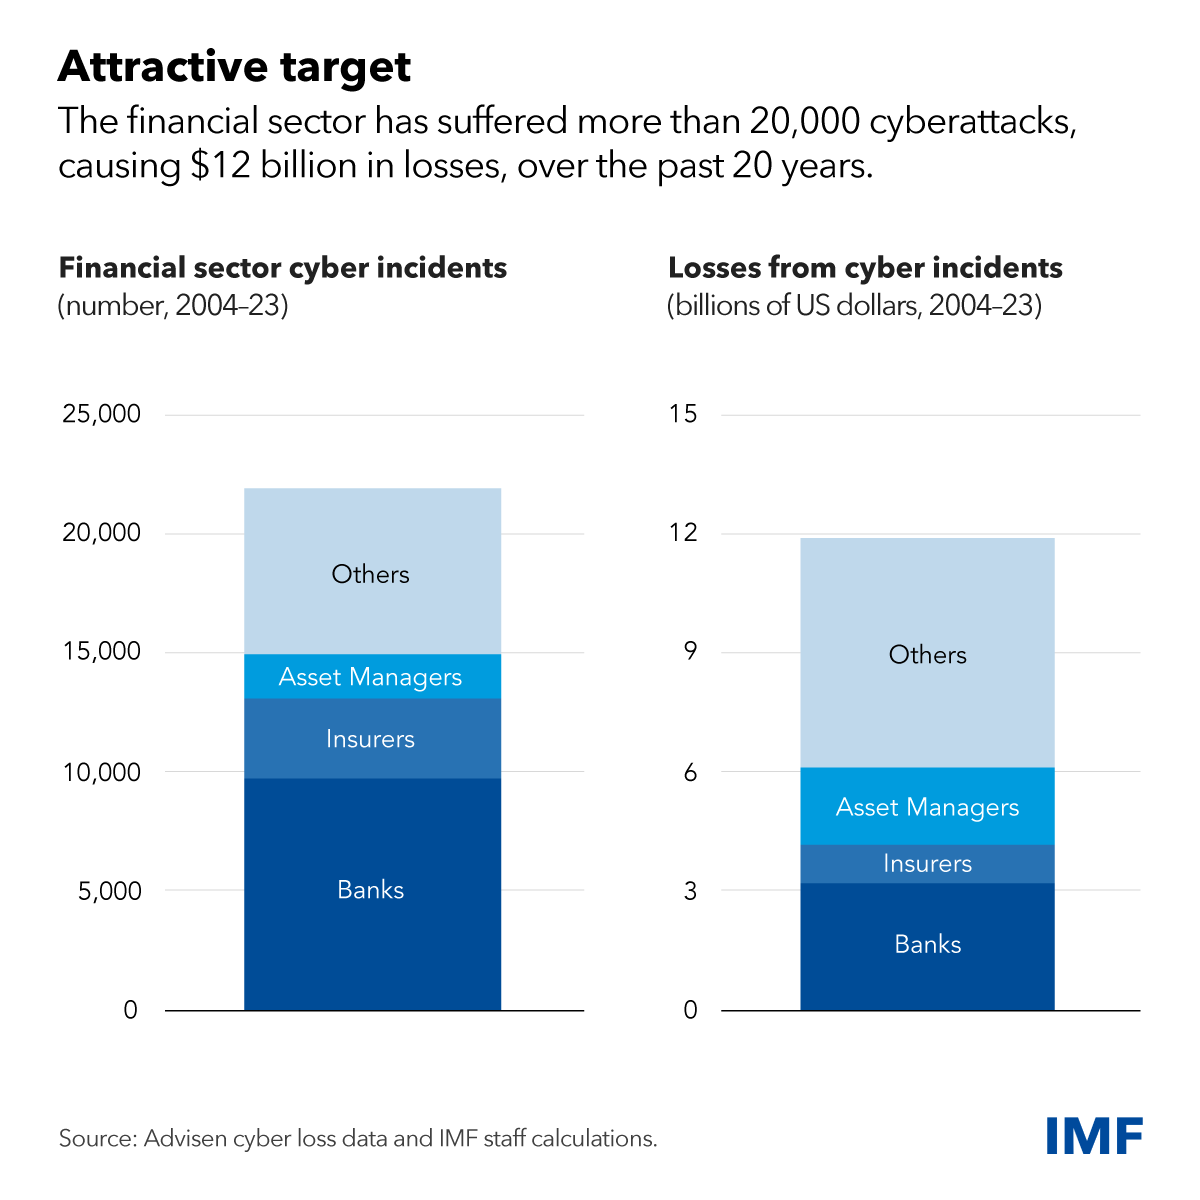 Cyberattacks frequently target the financial sector, which manages vast amounts of sensitive data. Nearly 20% of these incidents aim at financial firms, highlighting the critical need for robust cybersecurity measures. Learn more in our blog. imf.org/en/Blogs/Artic…